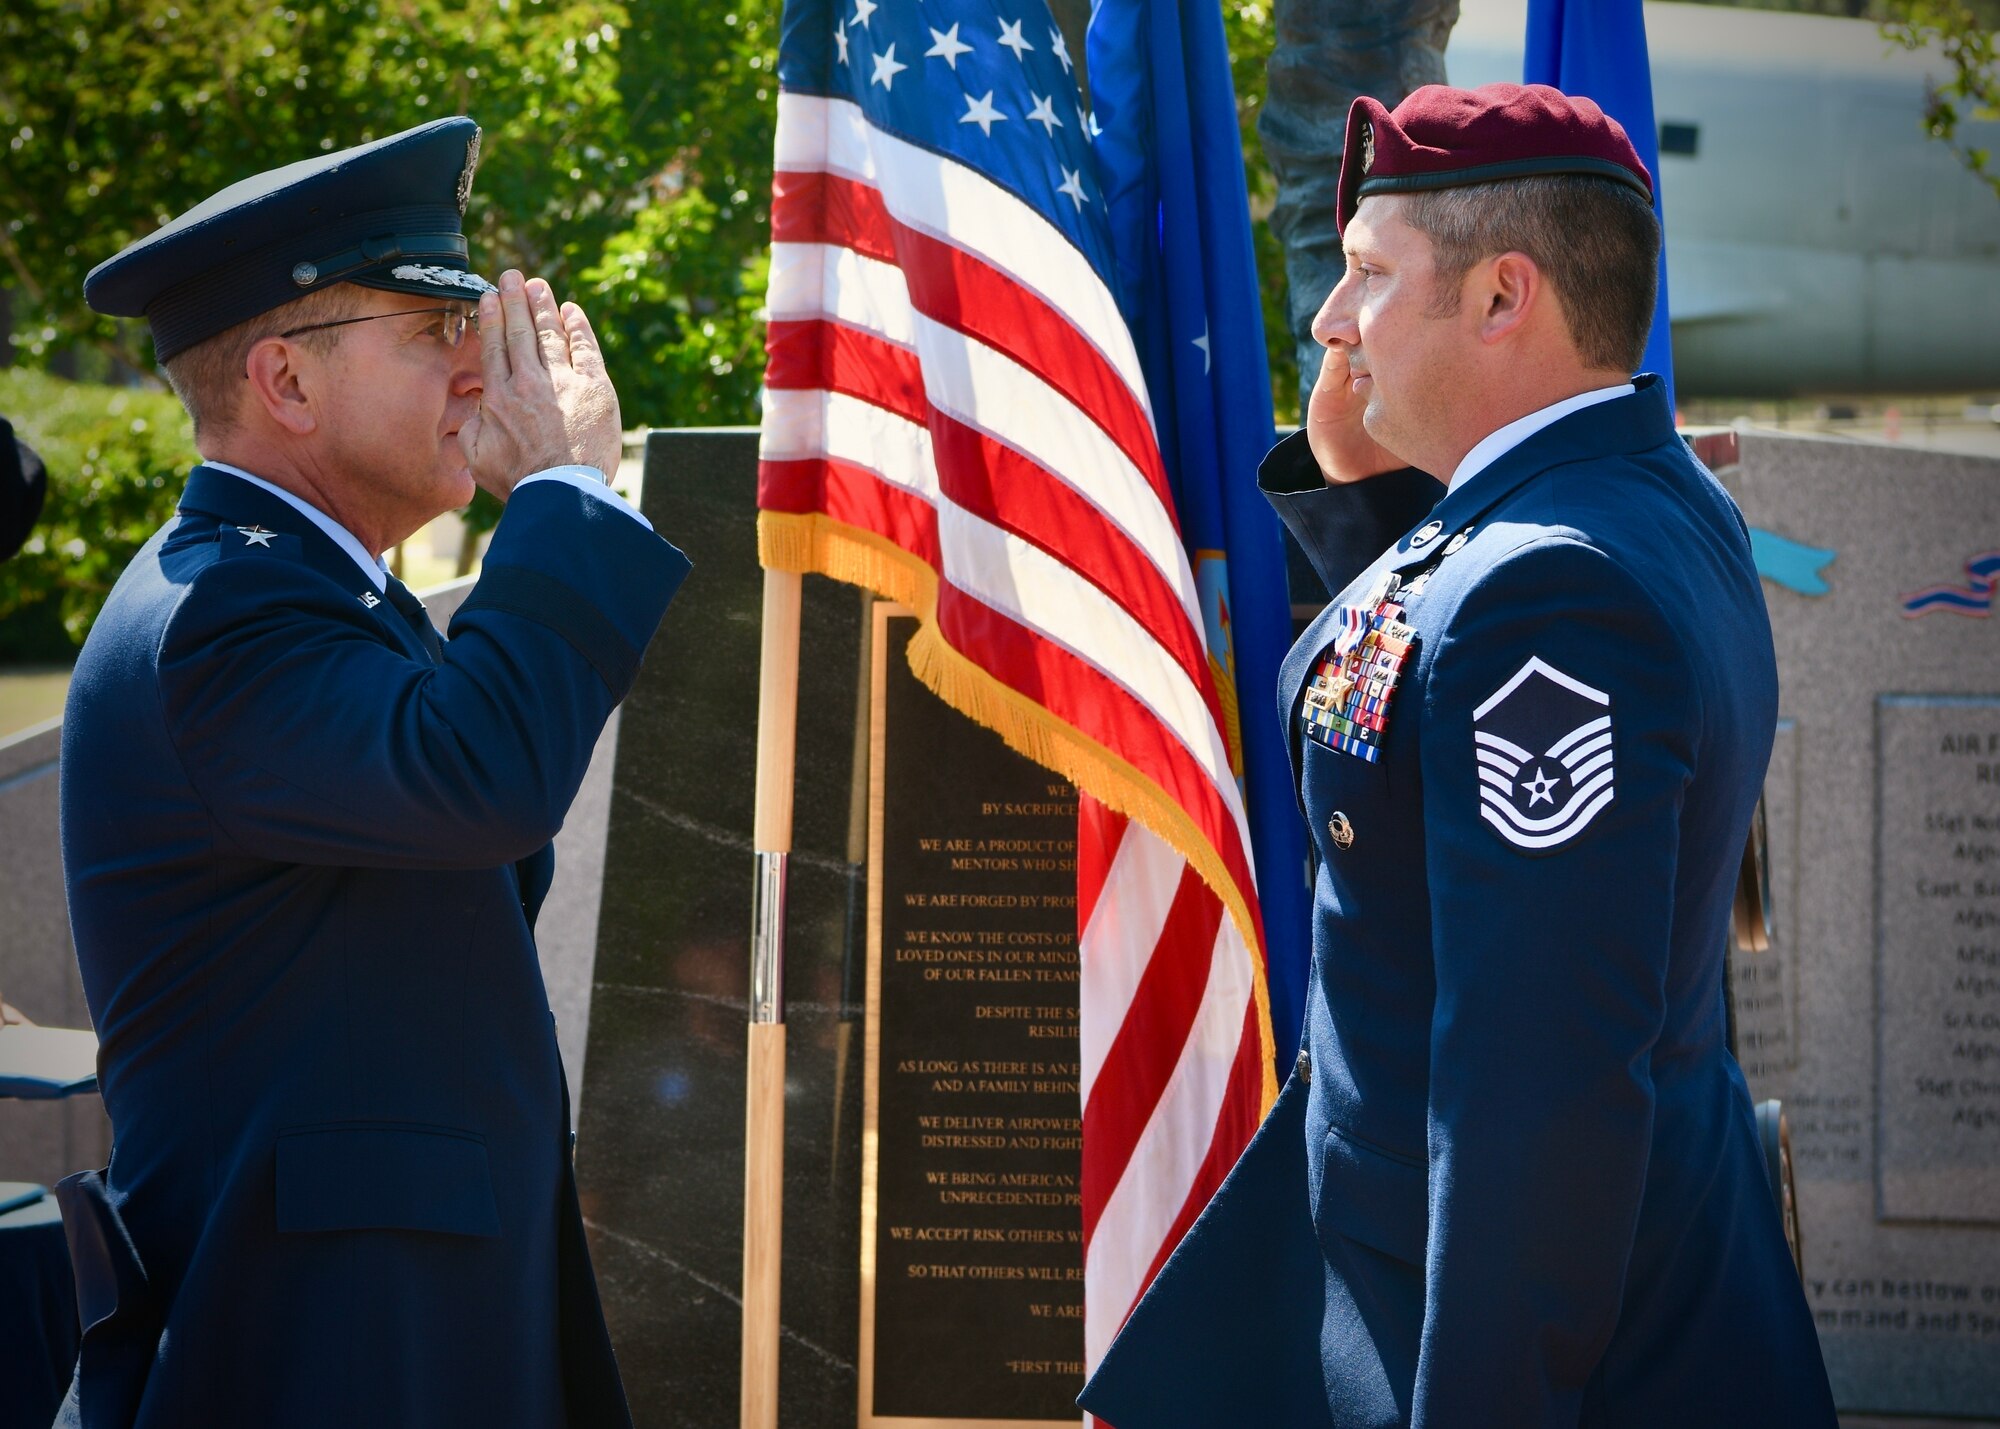 U.S. Air Force Lt. Gen. Jim Slife, commander of Air Force Special Operations Command, salutes Master Sgt. Cory Haggett, a special tactics operator with the 23d Special Tactics Squadron, 24th Special Operations Wing, after presenting him the Silver Star Medal during a ceremony May 13, 2022, at Hurlburt Field, Fla.  The Silver Star is the third-highest military combat decoration that can be awarded to a member of the United States Armed Forces.